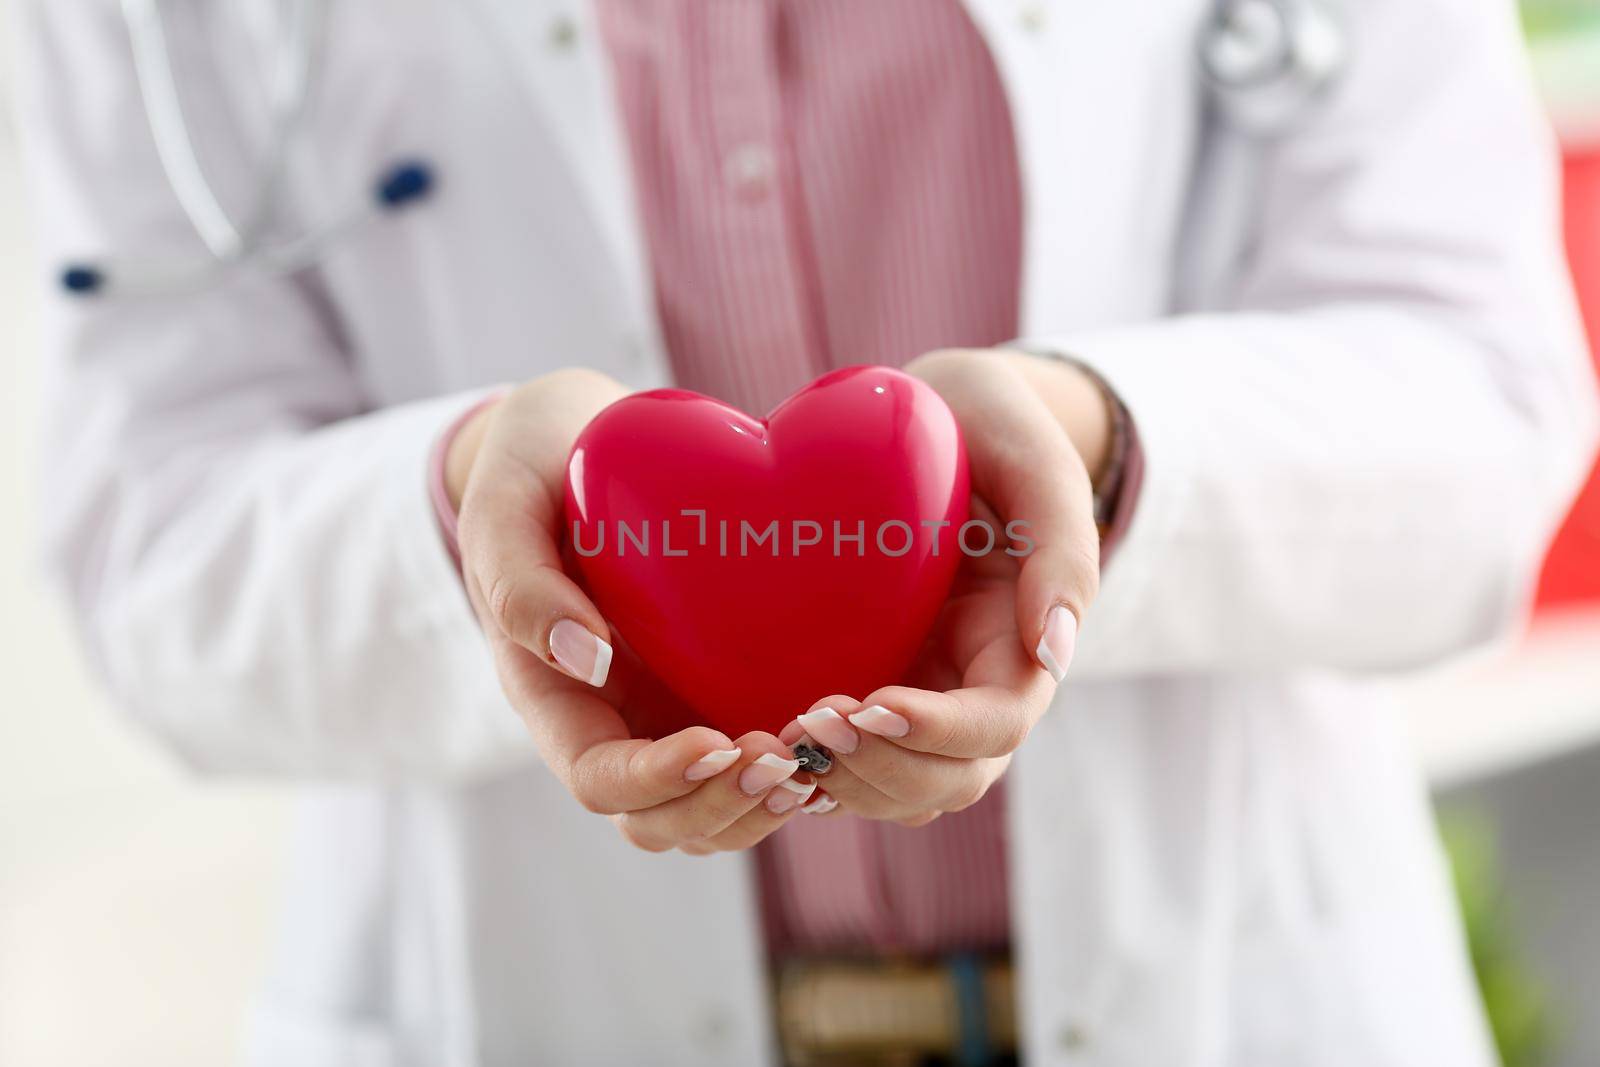 Female doctor hold in arms and cover red toy heart closeup. Cardio therapeutist student education CPR 911 life save physician make cardiac physical pulse rate measure arrhythmia lifestyle